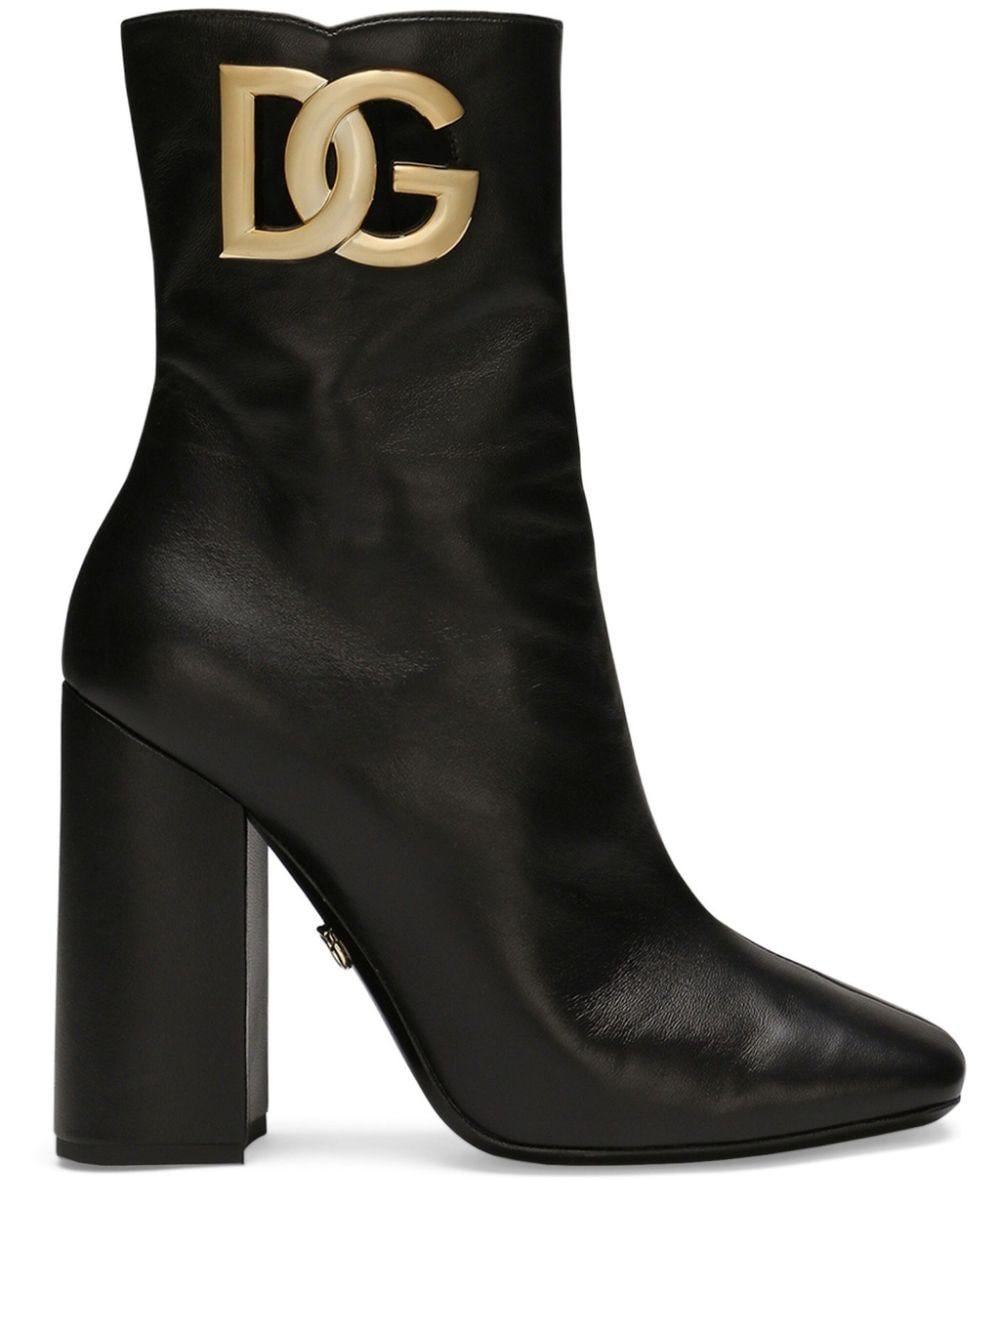 DOLCE & GABBANA BLACK BOOTS WITH GOLD LOGO PLAQUE